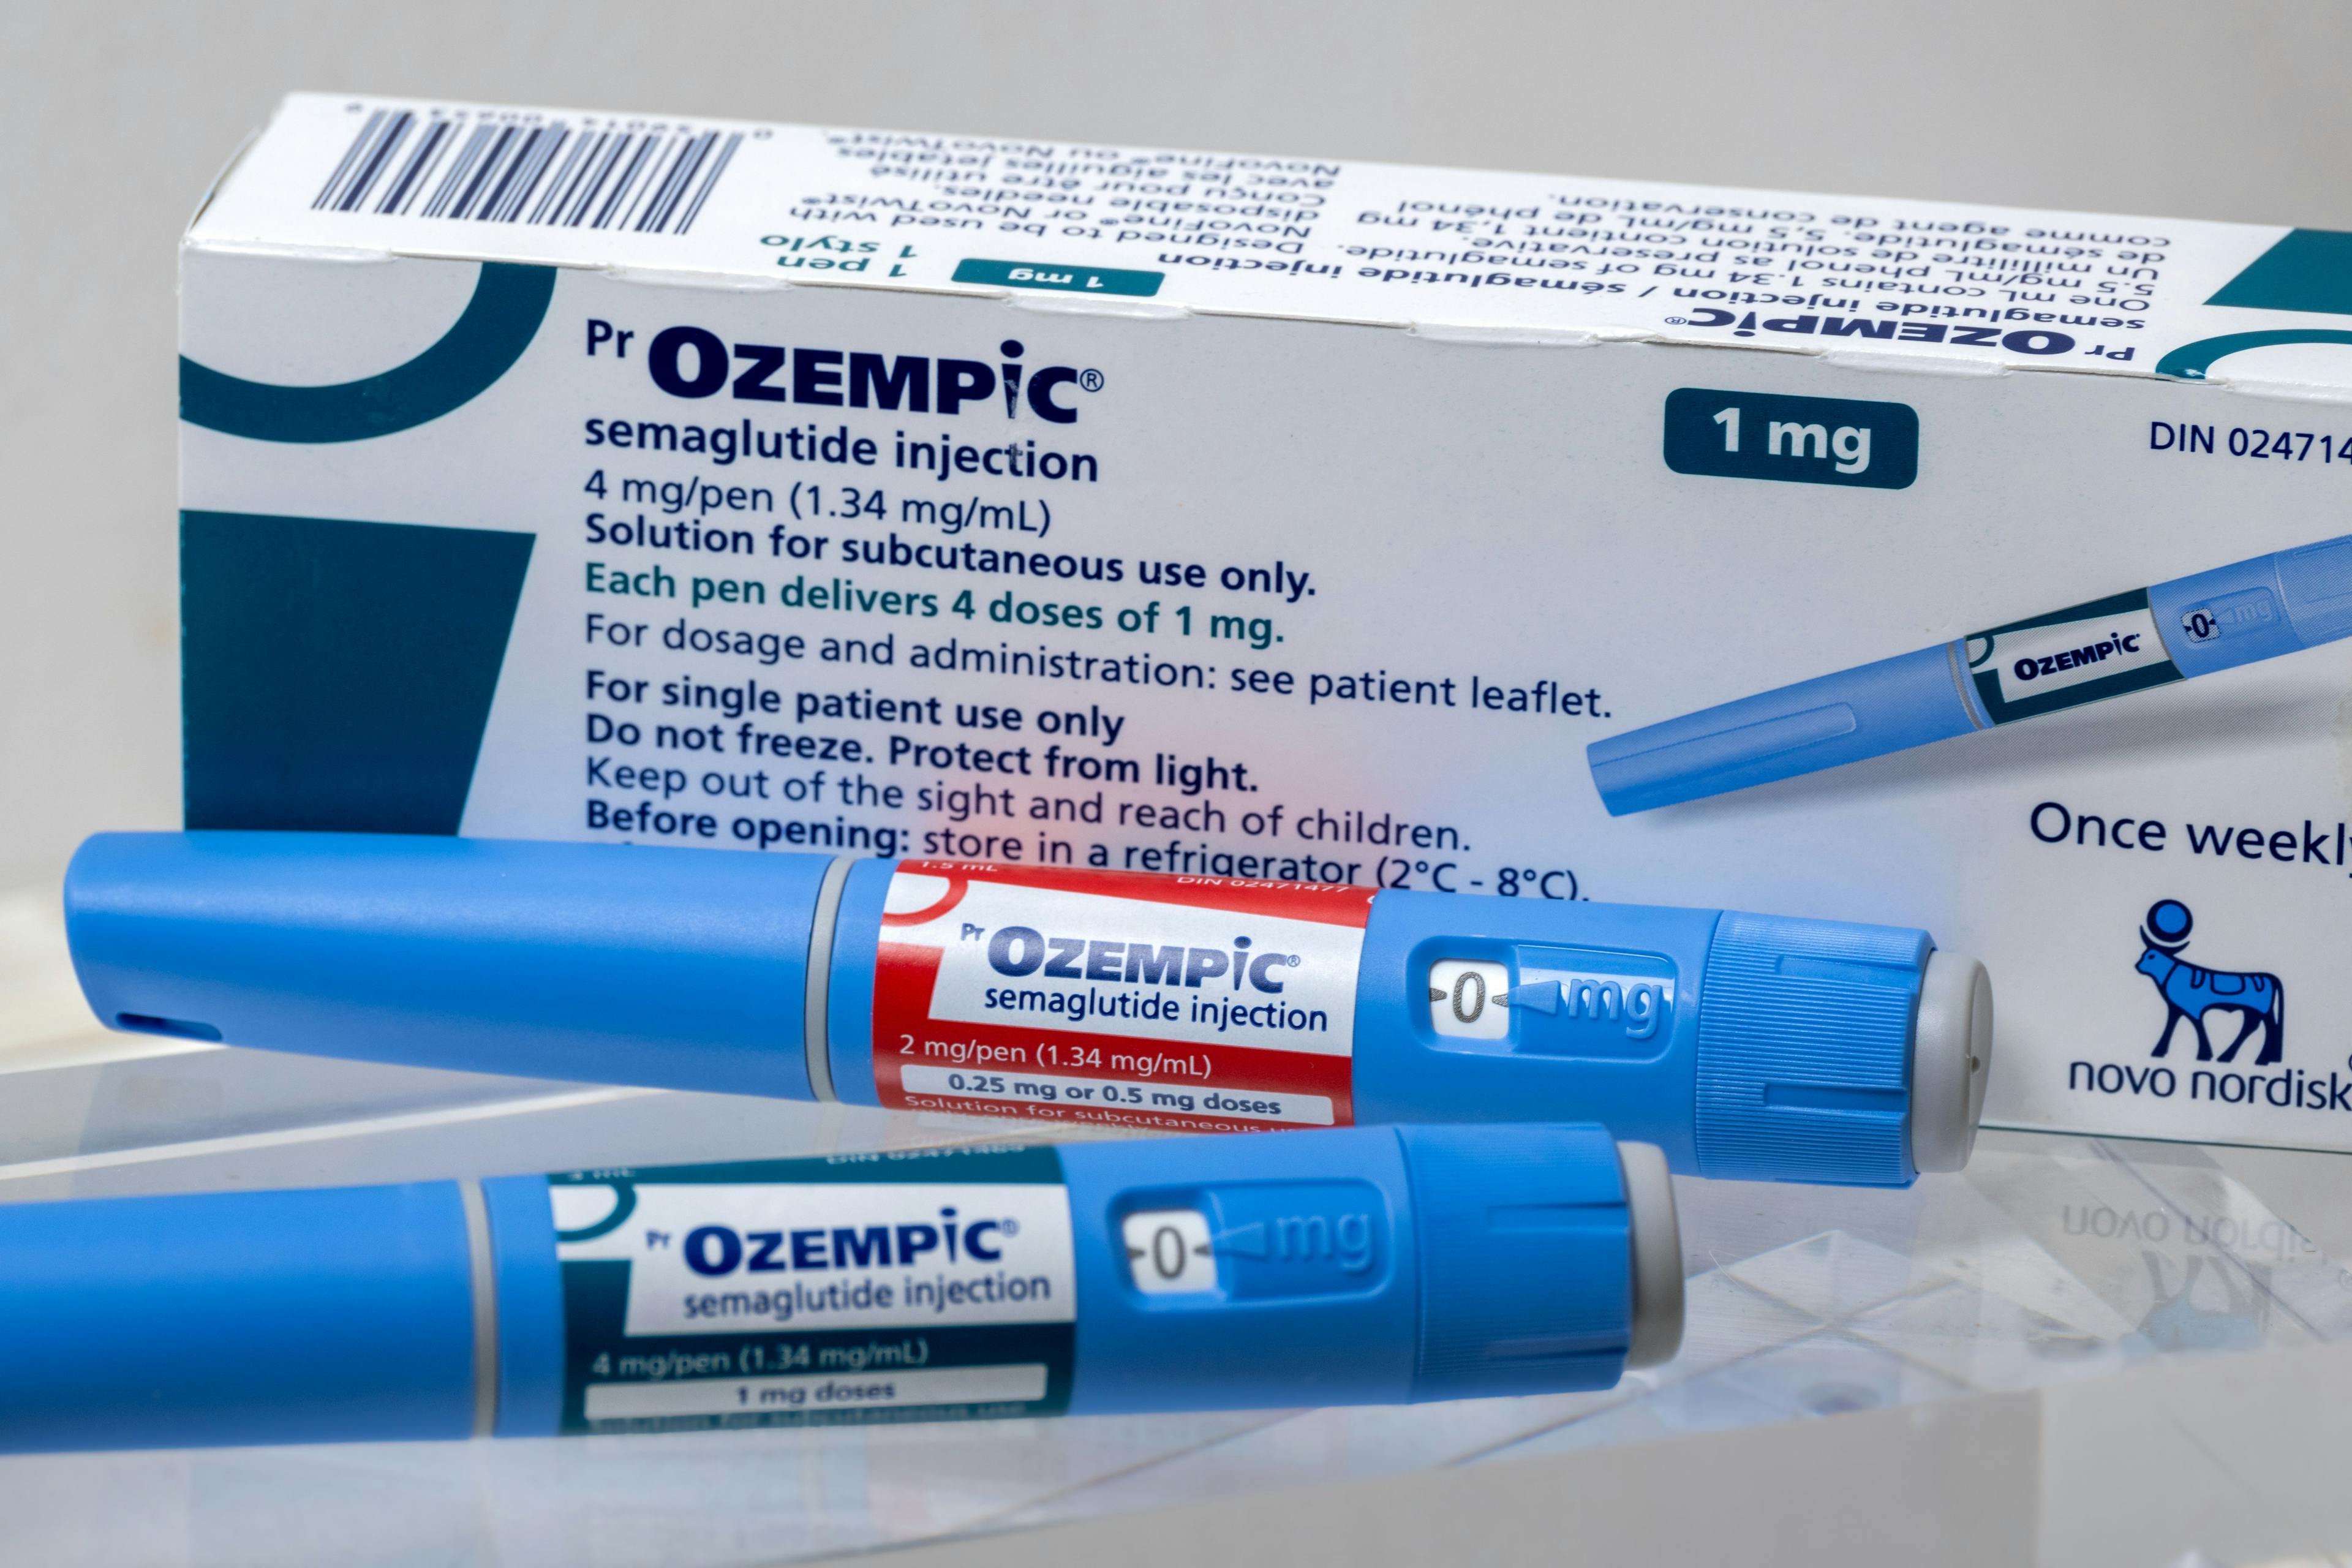 Ozempic injections | Image credit: mbruxelle – stock.adobe.com